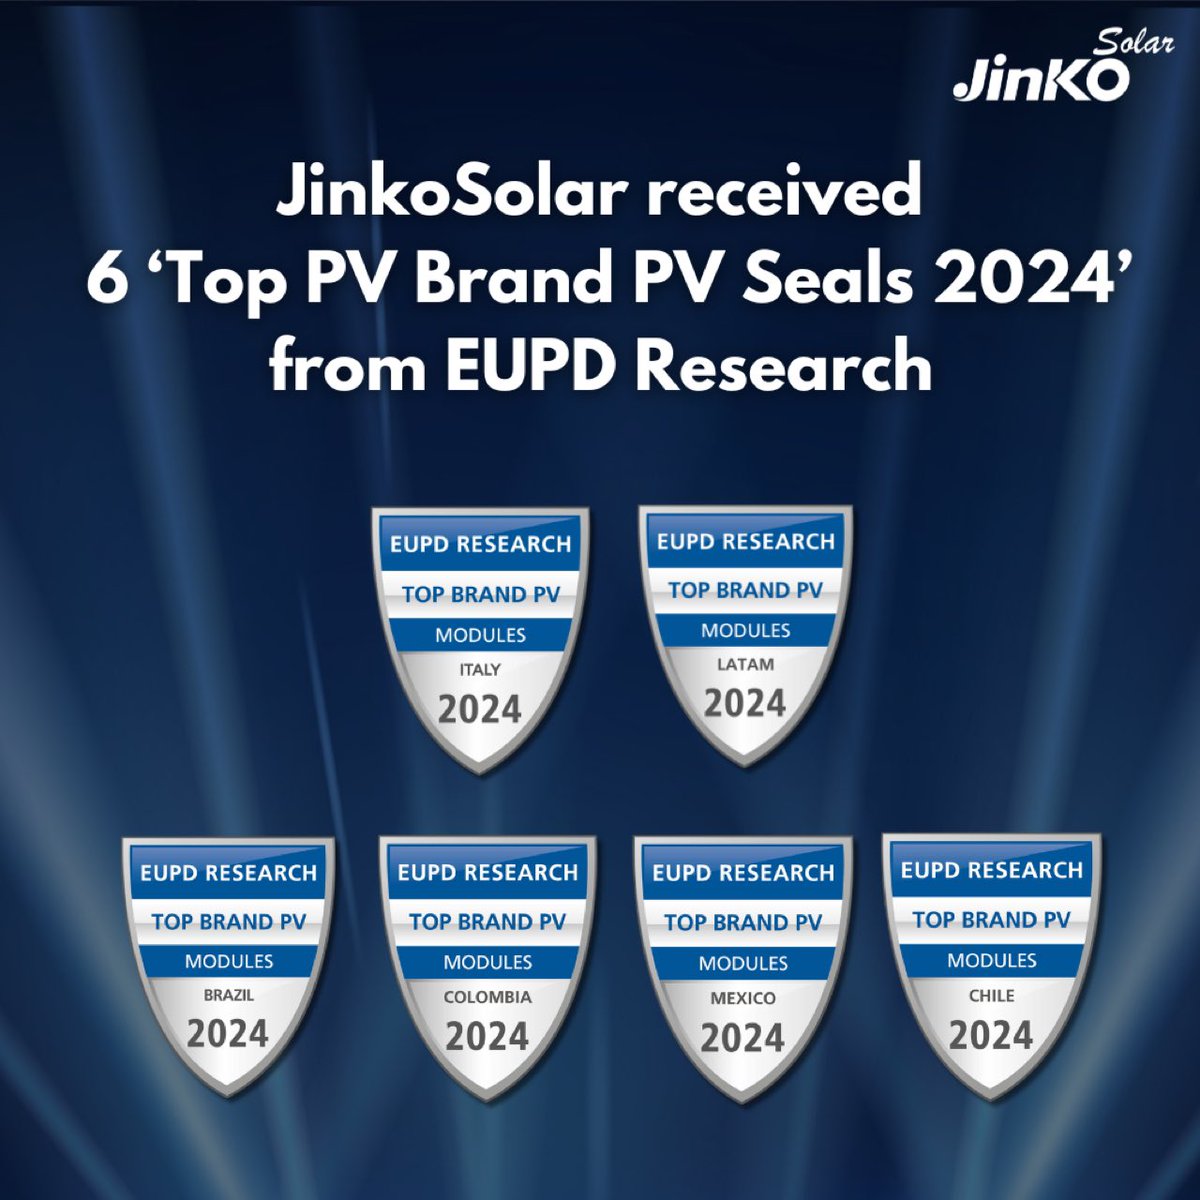 🌟 JinkoSolar received 6 'Top PV Brand PV Seals 2024' from EUPD Research 🥇 

Jinko Solar recently has been awarded by EUPD Research with six 'Top PV Brand' seals in Brazil, Colombia, Mexico, Chile, the LATAM region and one for Italy.

#SolarInnovation #SustainabilityLeadership